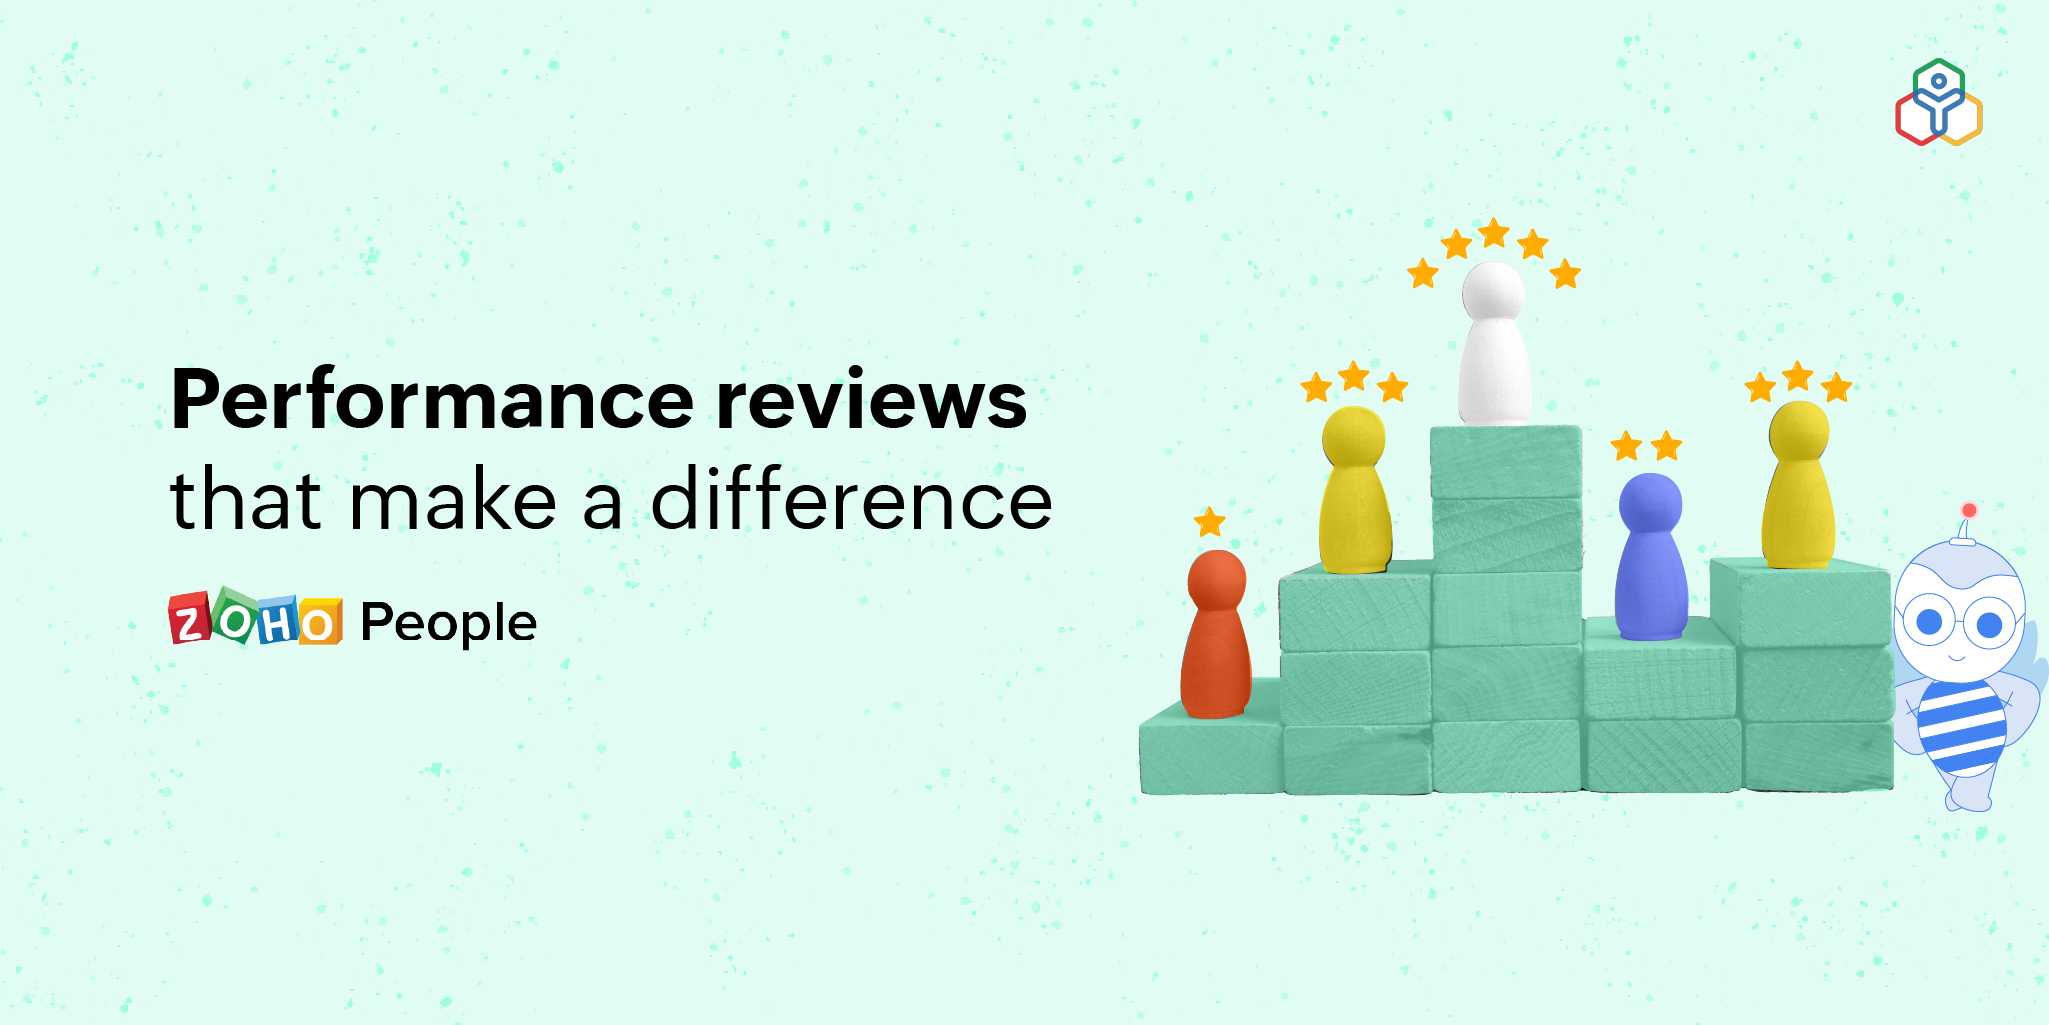 5 tips to get the best out of performance reviews